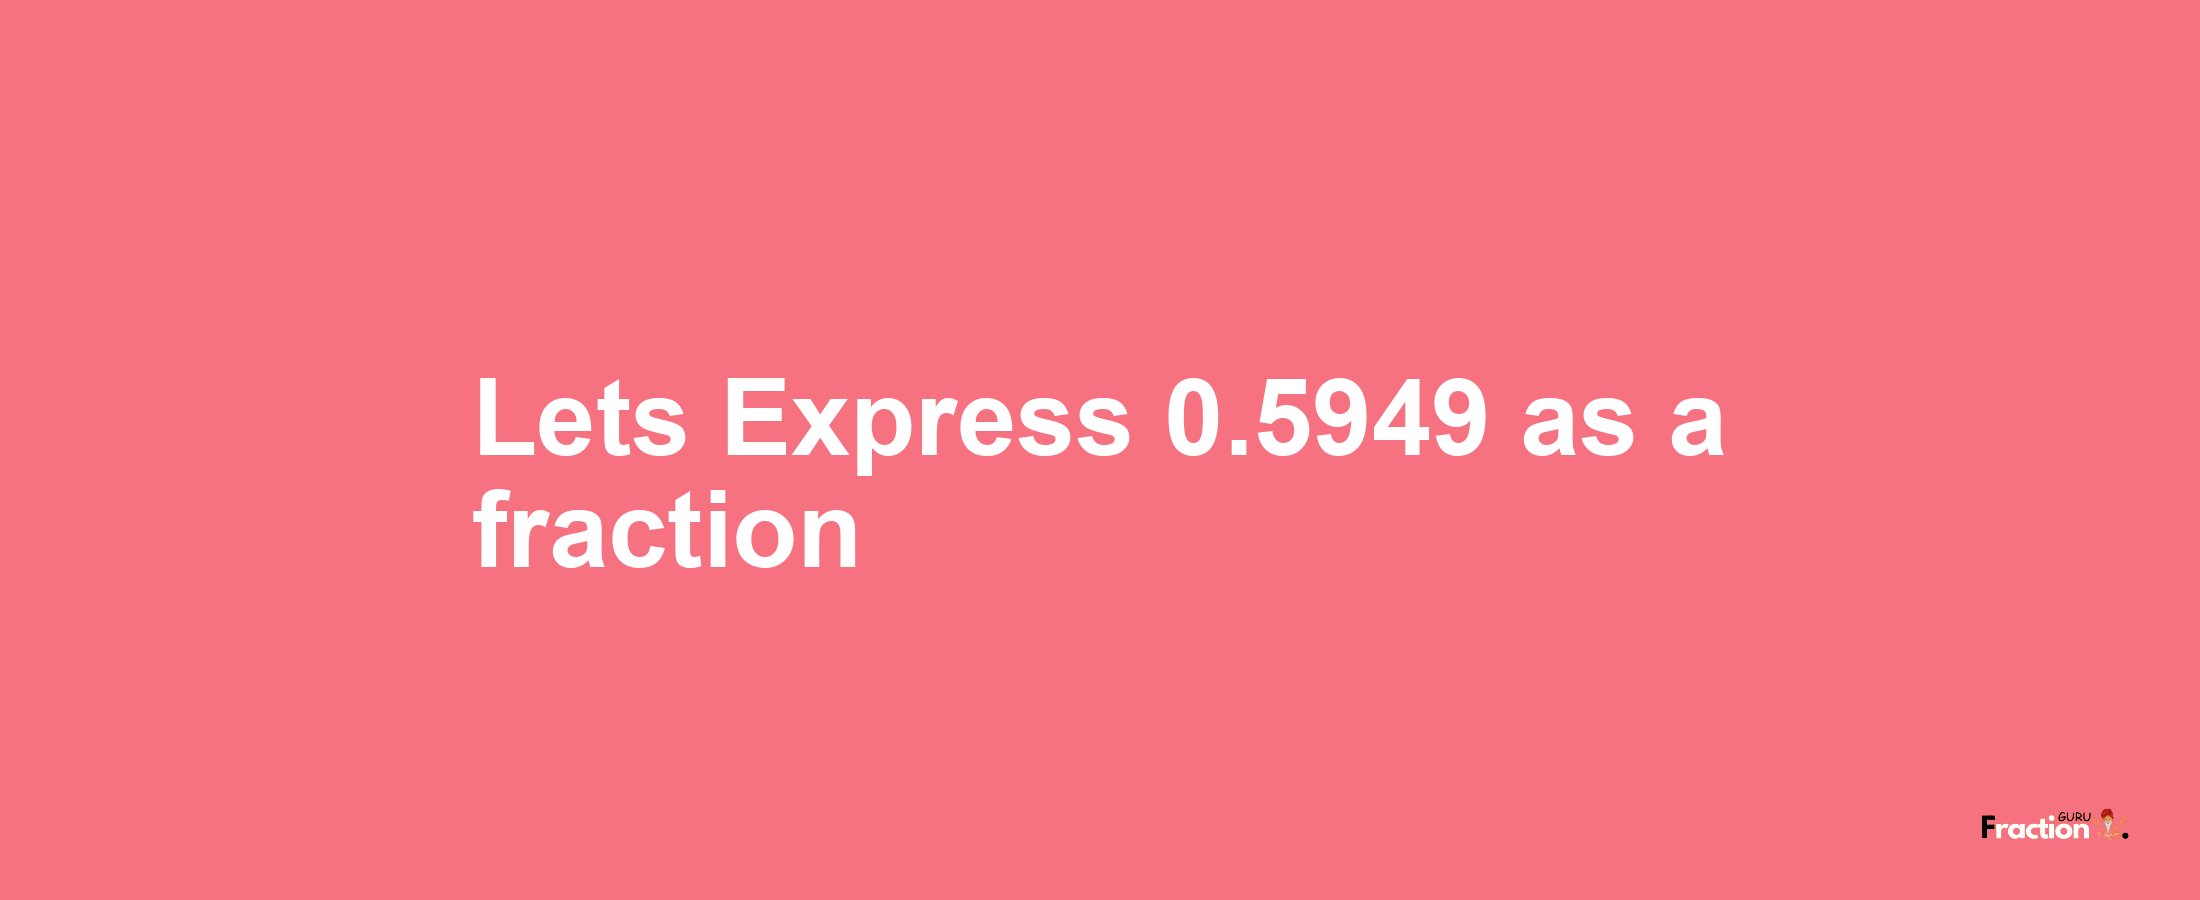 Lets Express 0.5949 as afraction